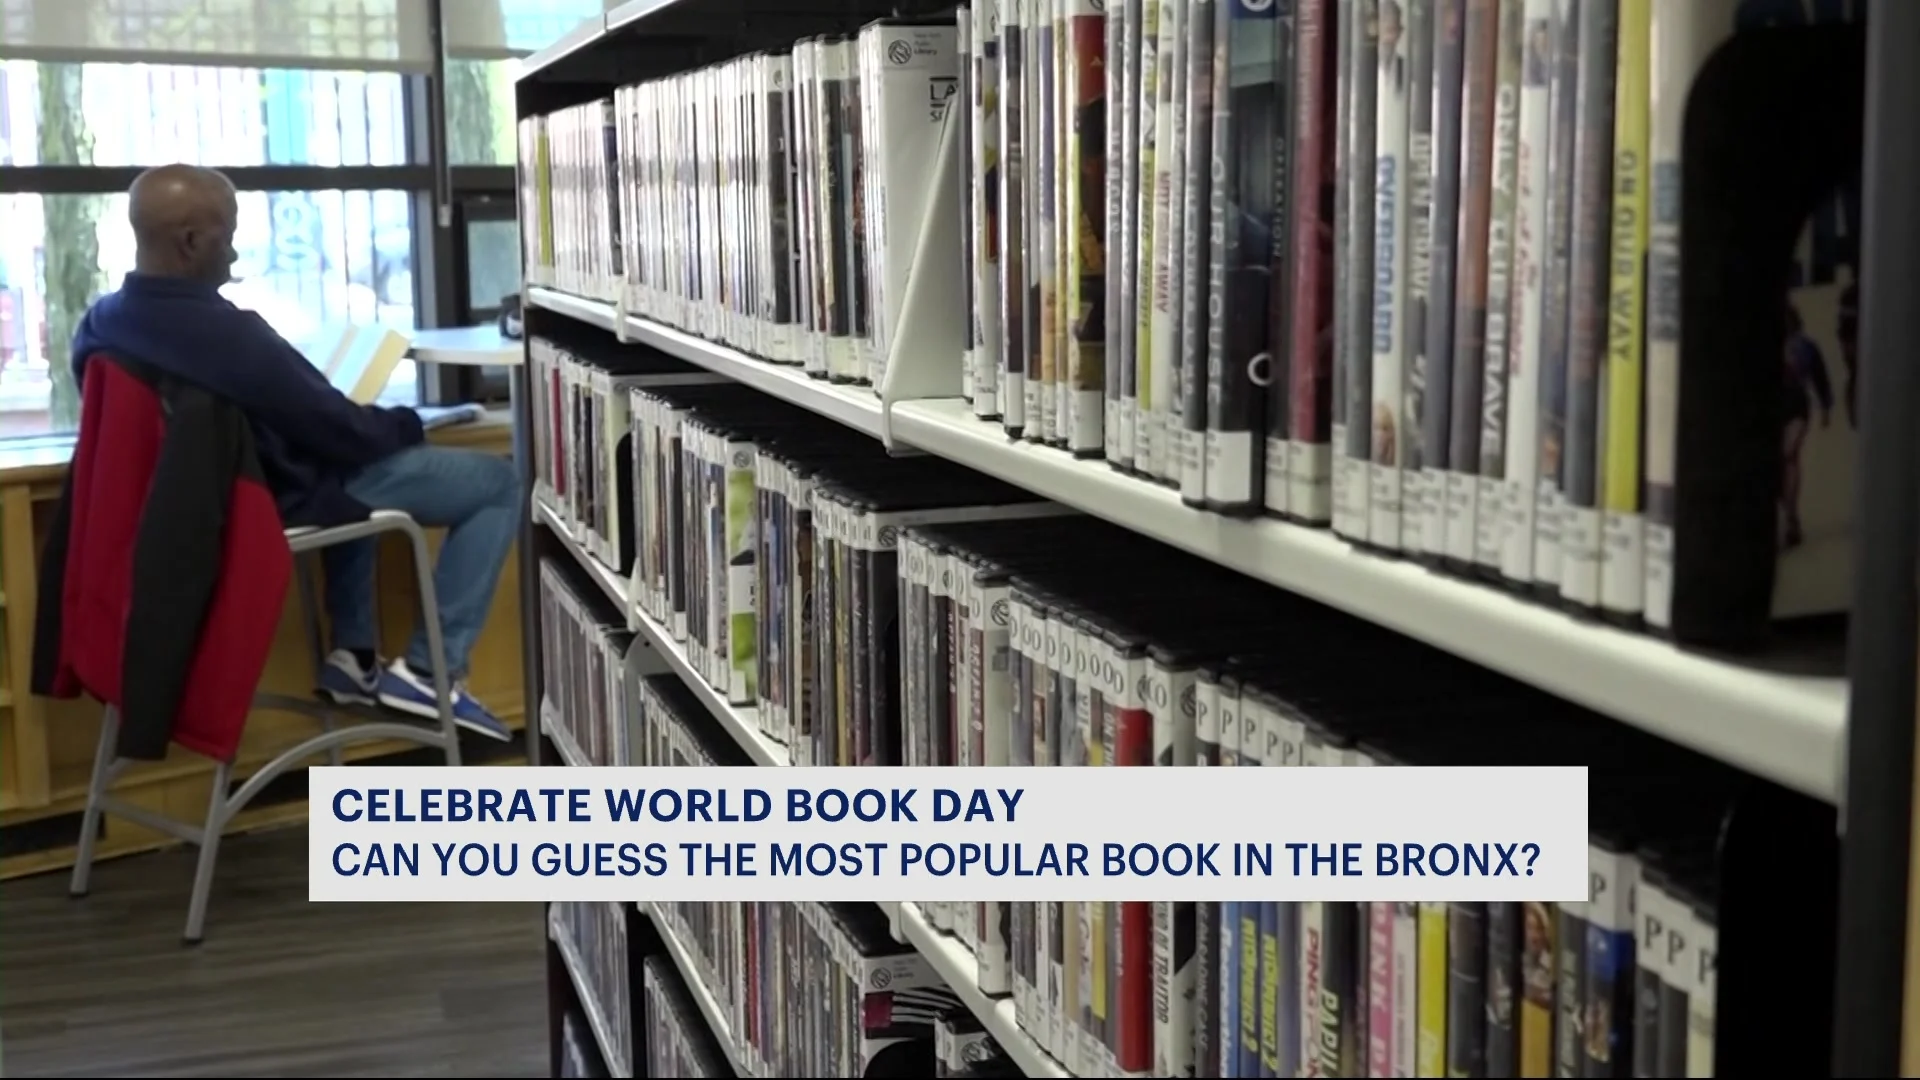 Empowering Minds: Local Author Marissa Morales Celebrates World Book Day in the Bronx